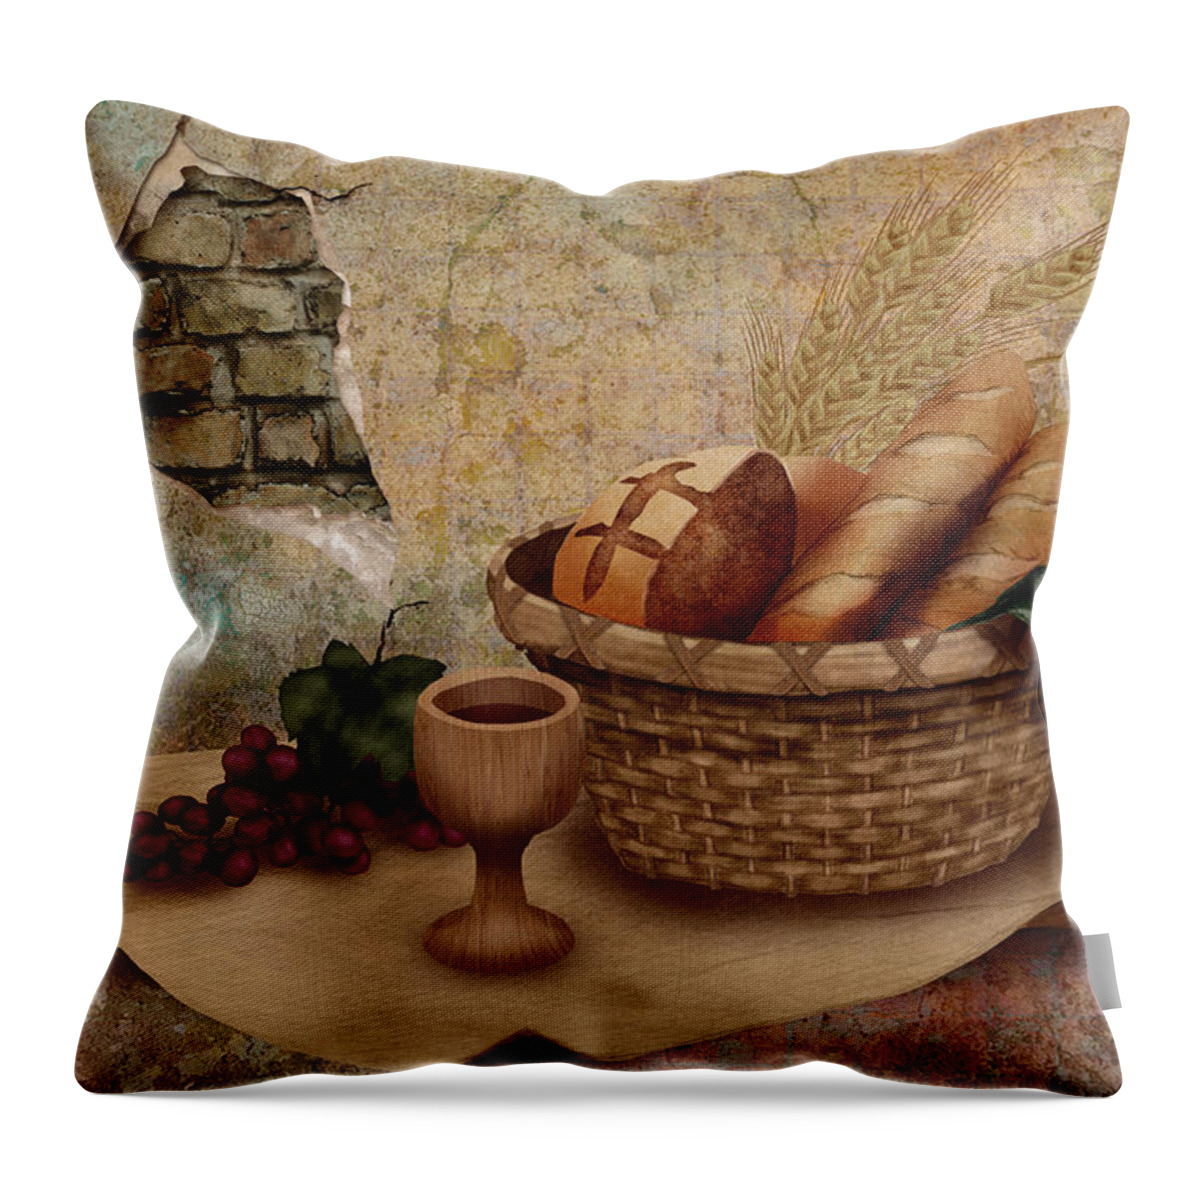 Jesus Throw Pillow featuring the digital art The Bread of Life by April Moen